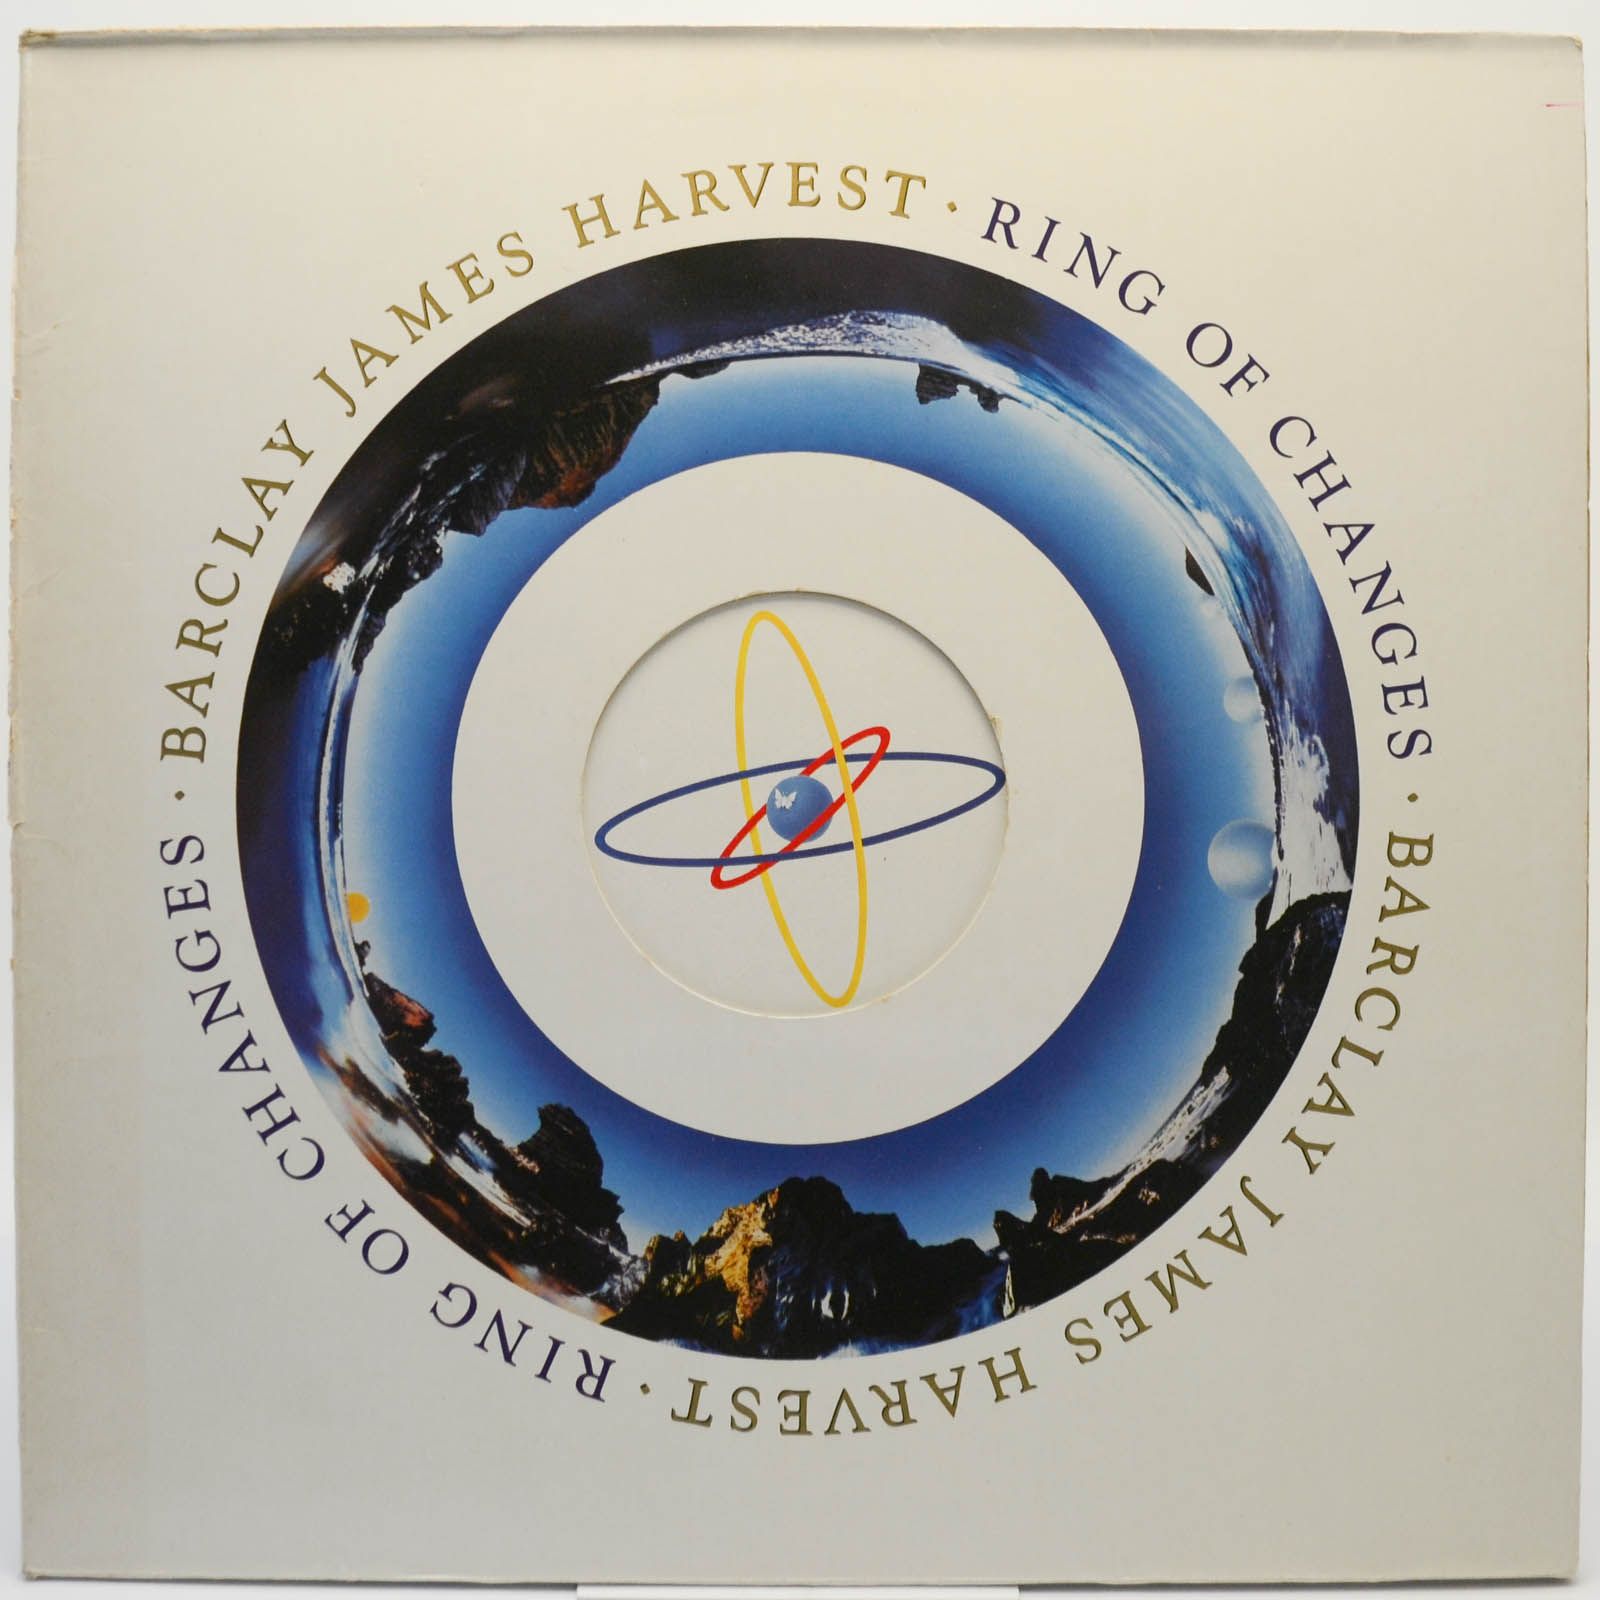 Barclay James Harvest — Ring Of Changes, 1983